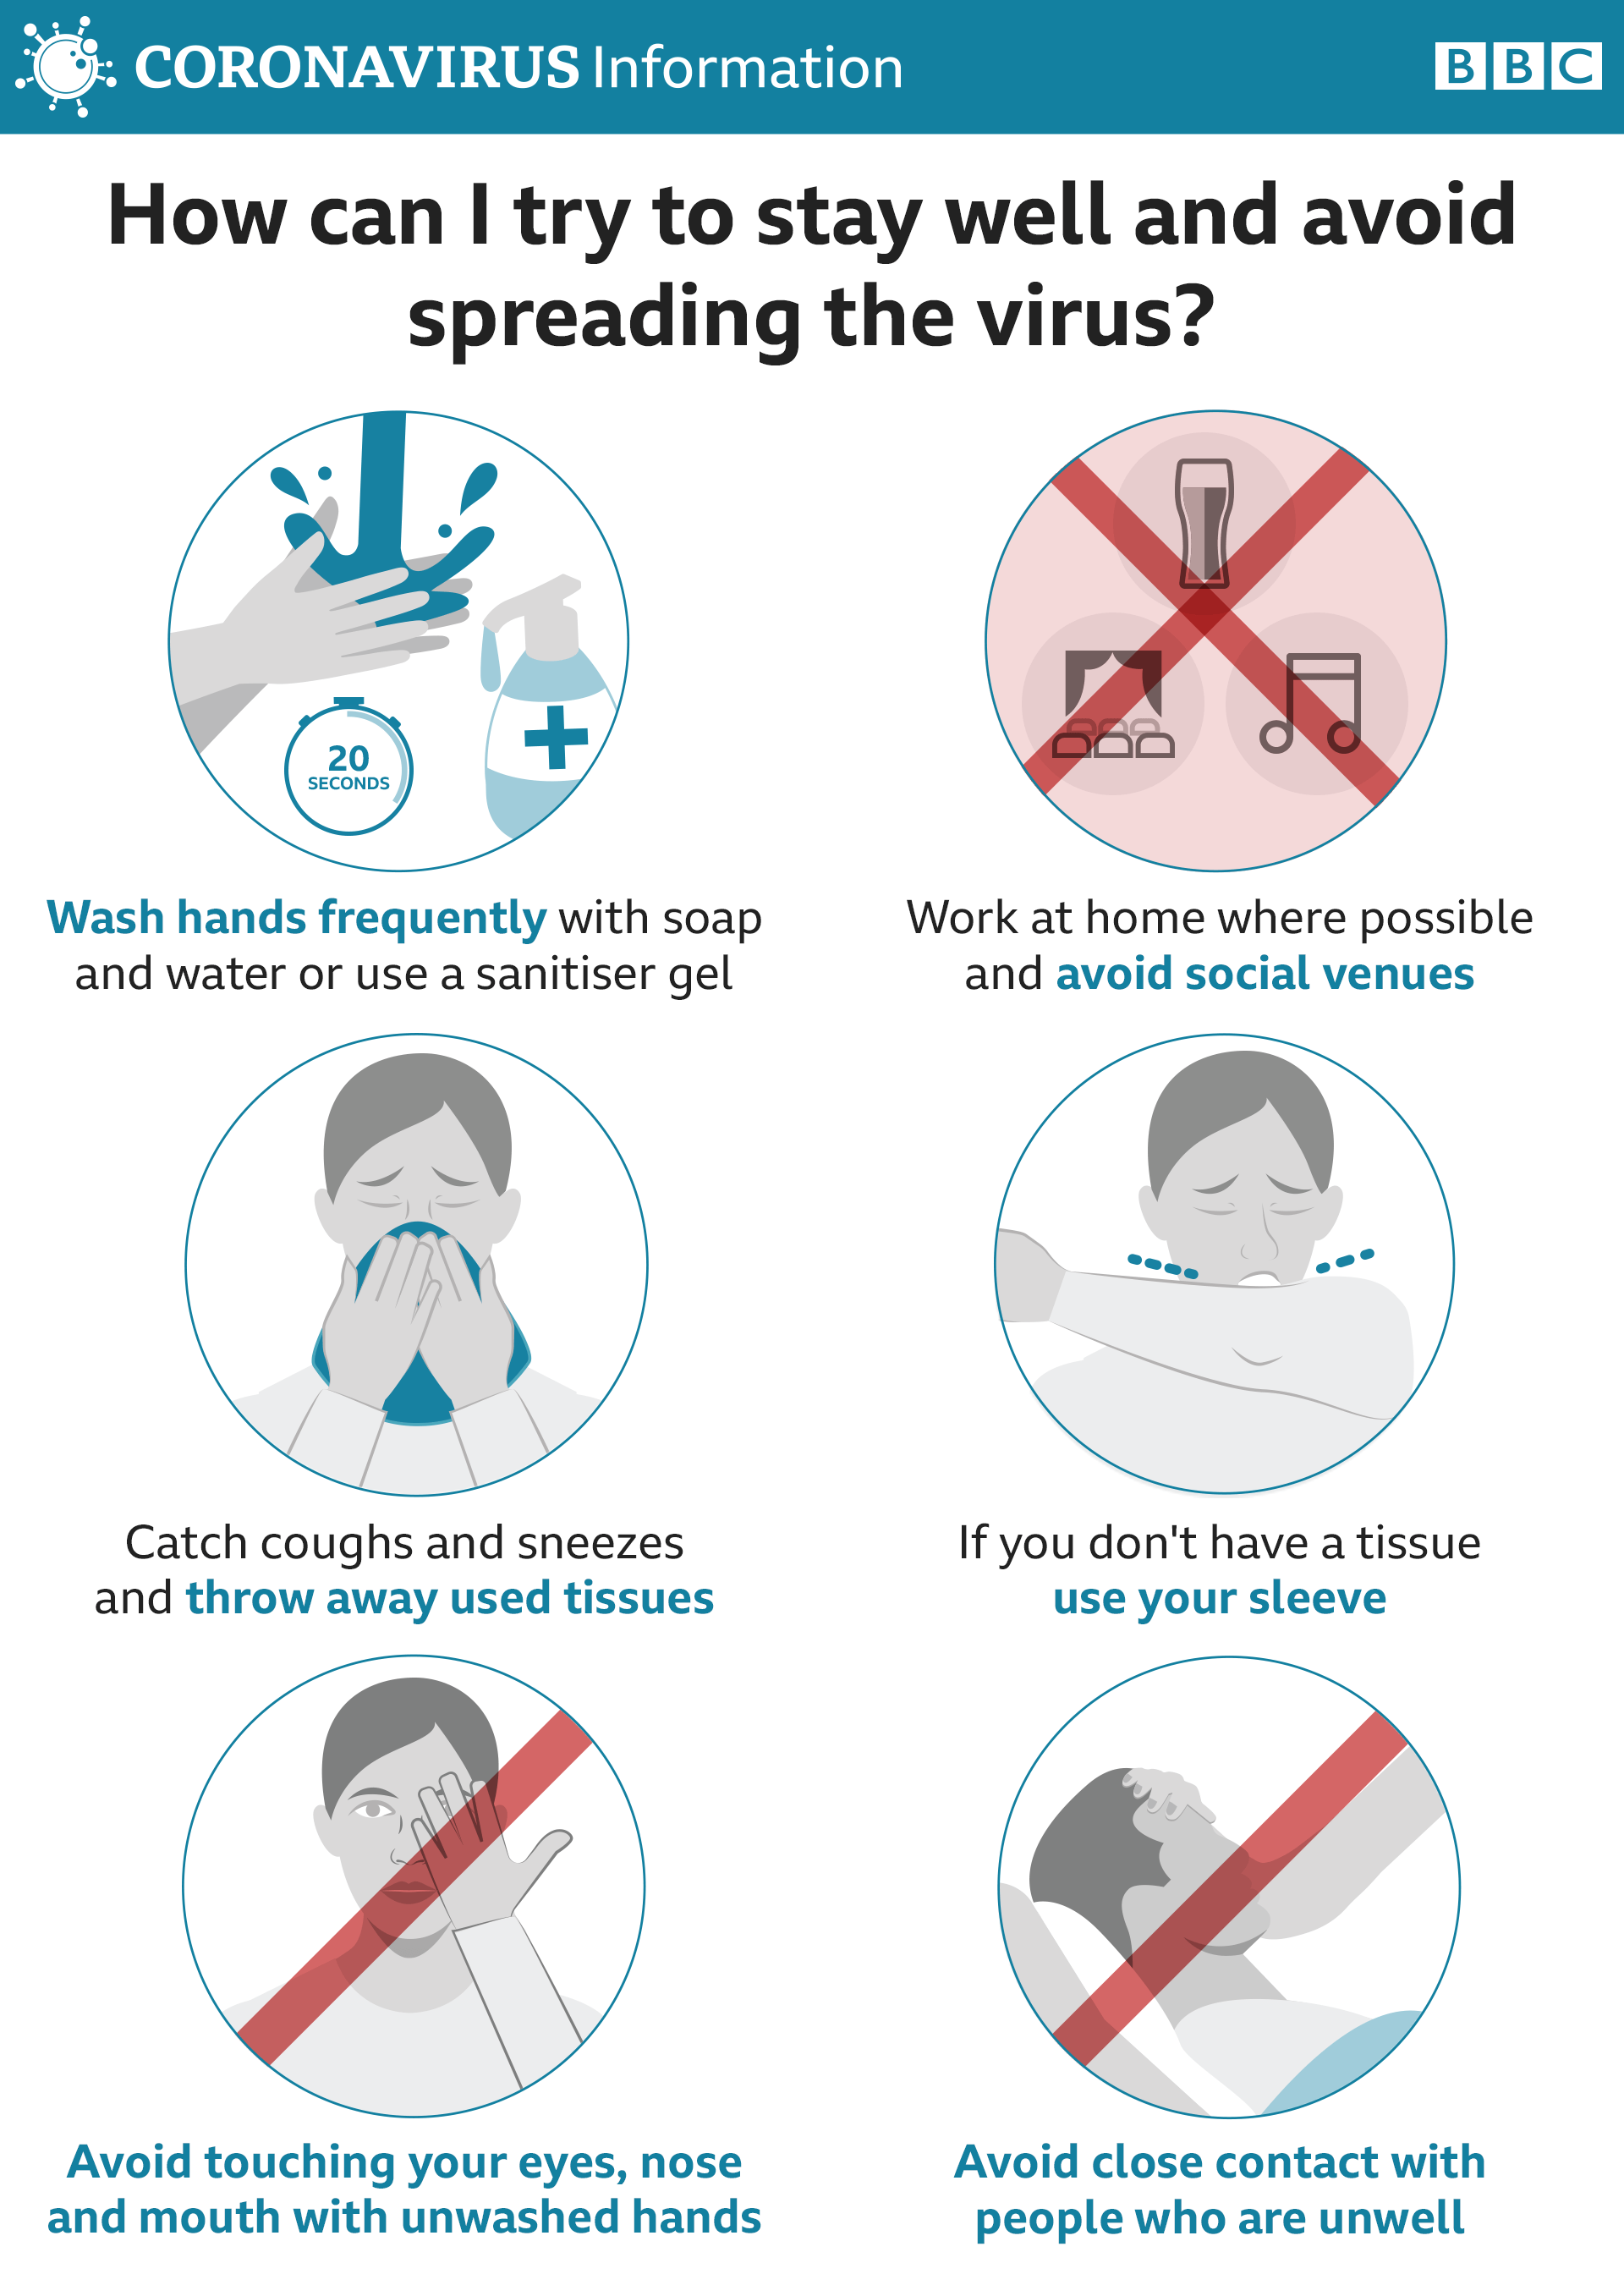 Public health experts say the best way to try to stay is well to start by washing your hands.